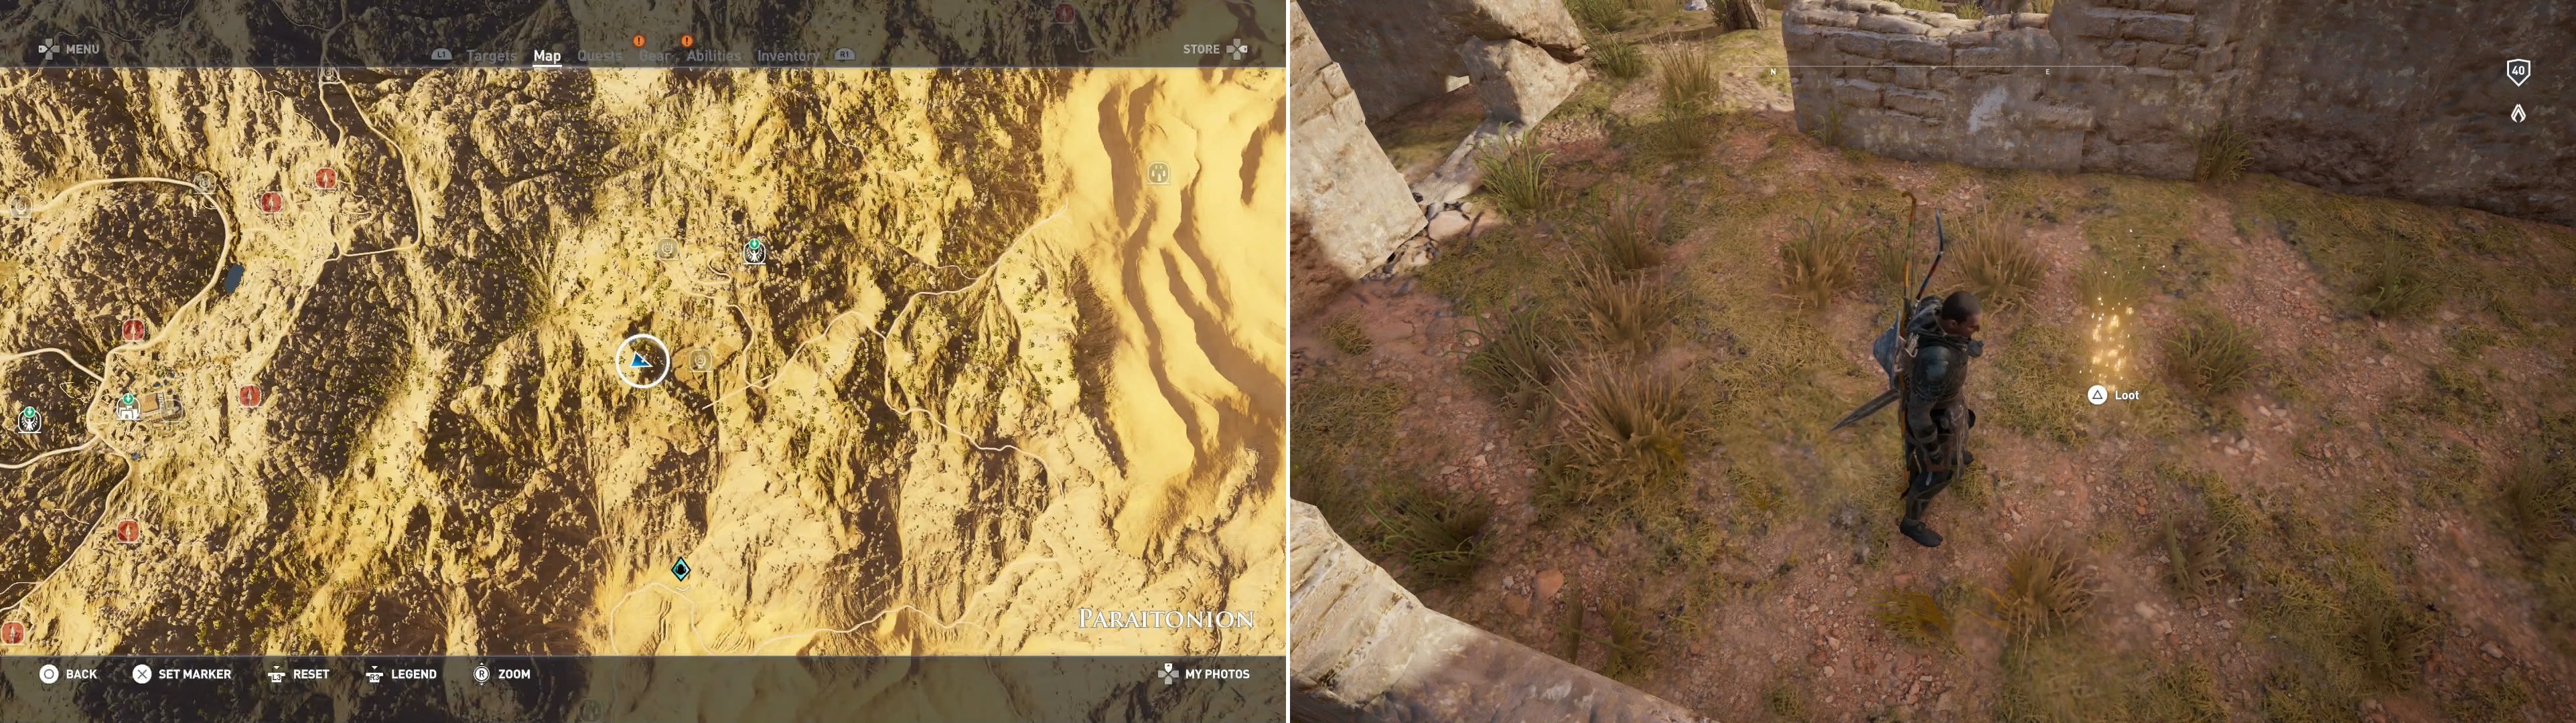 Head to the marked location on the map (left) then search the ruins to find the treasure mentioned in the Papyrus Puzzle scroll (right).